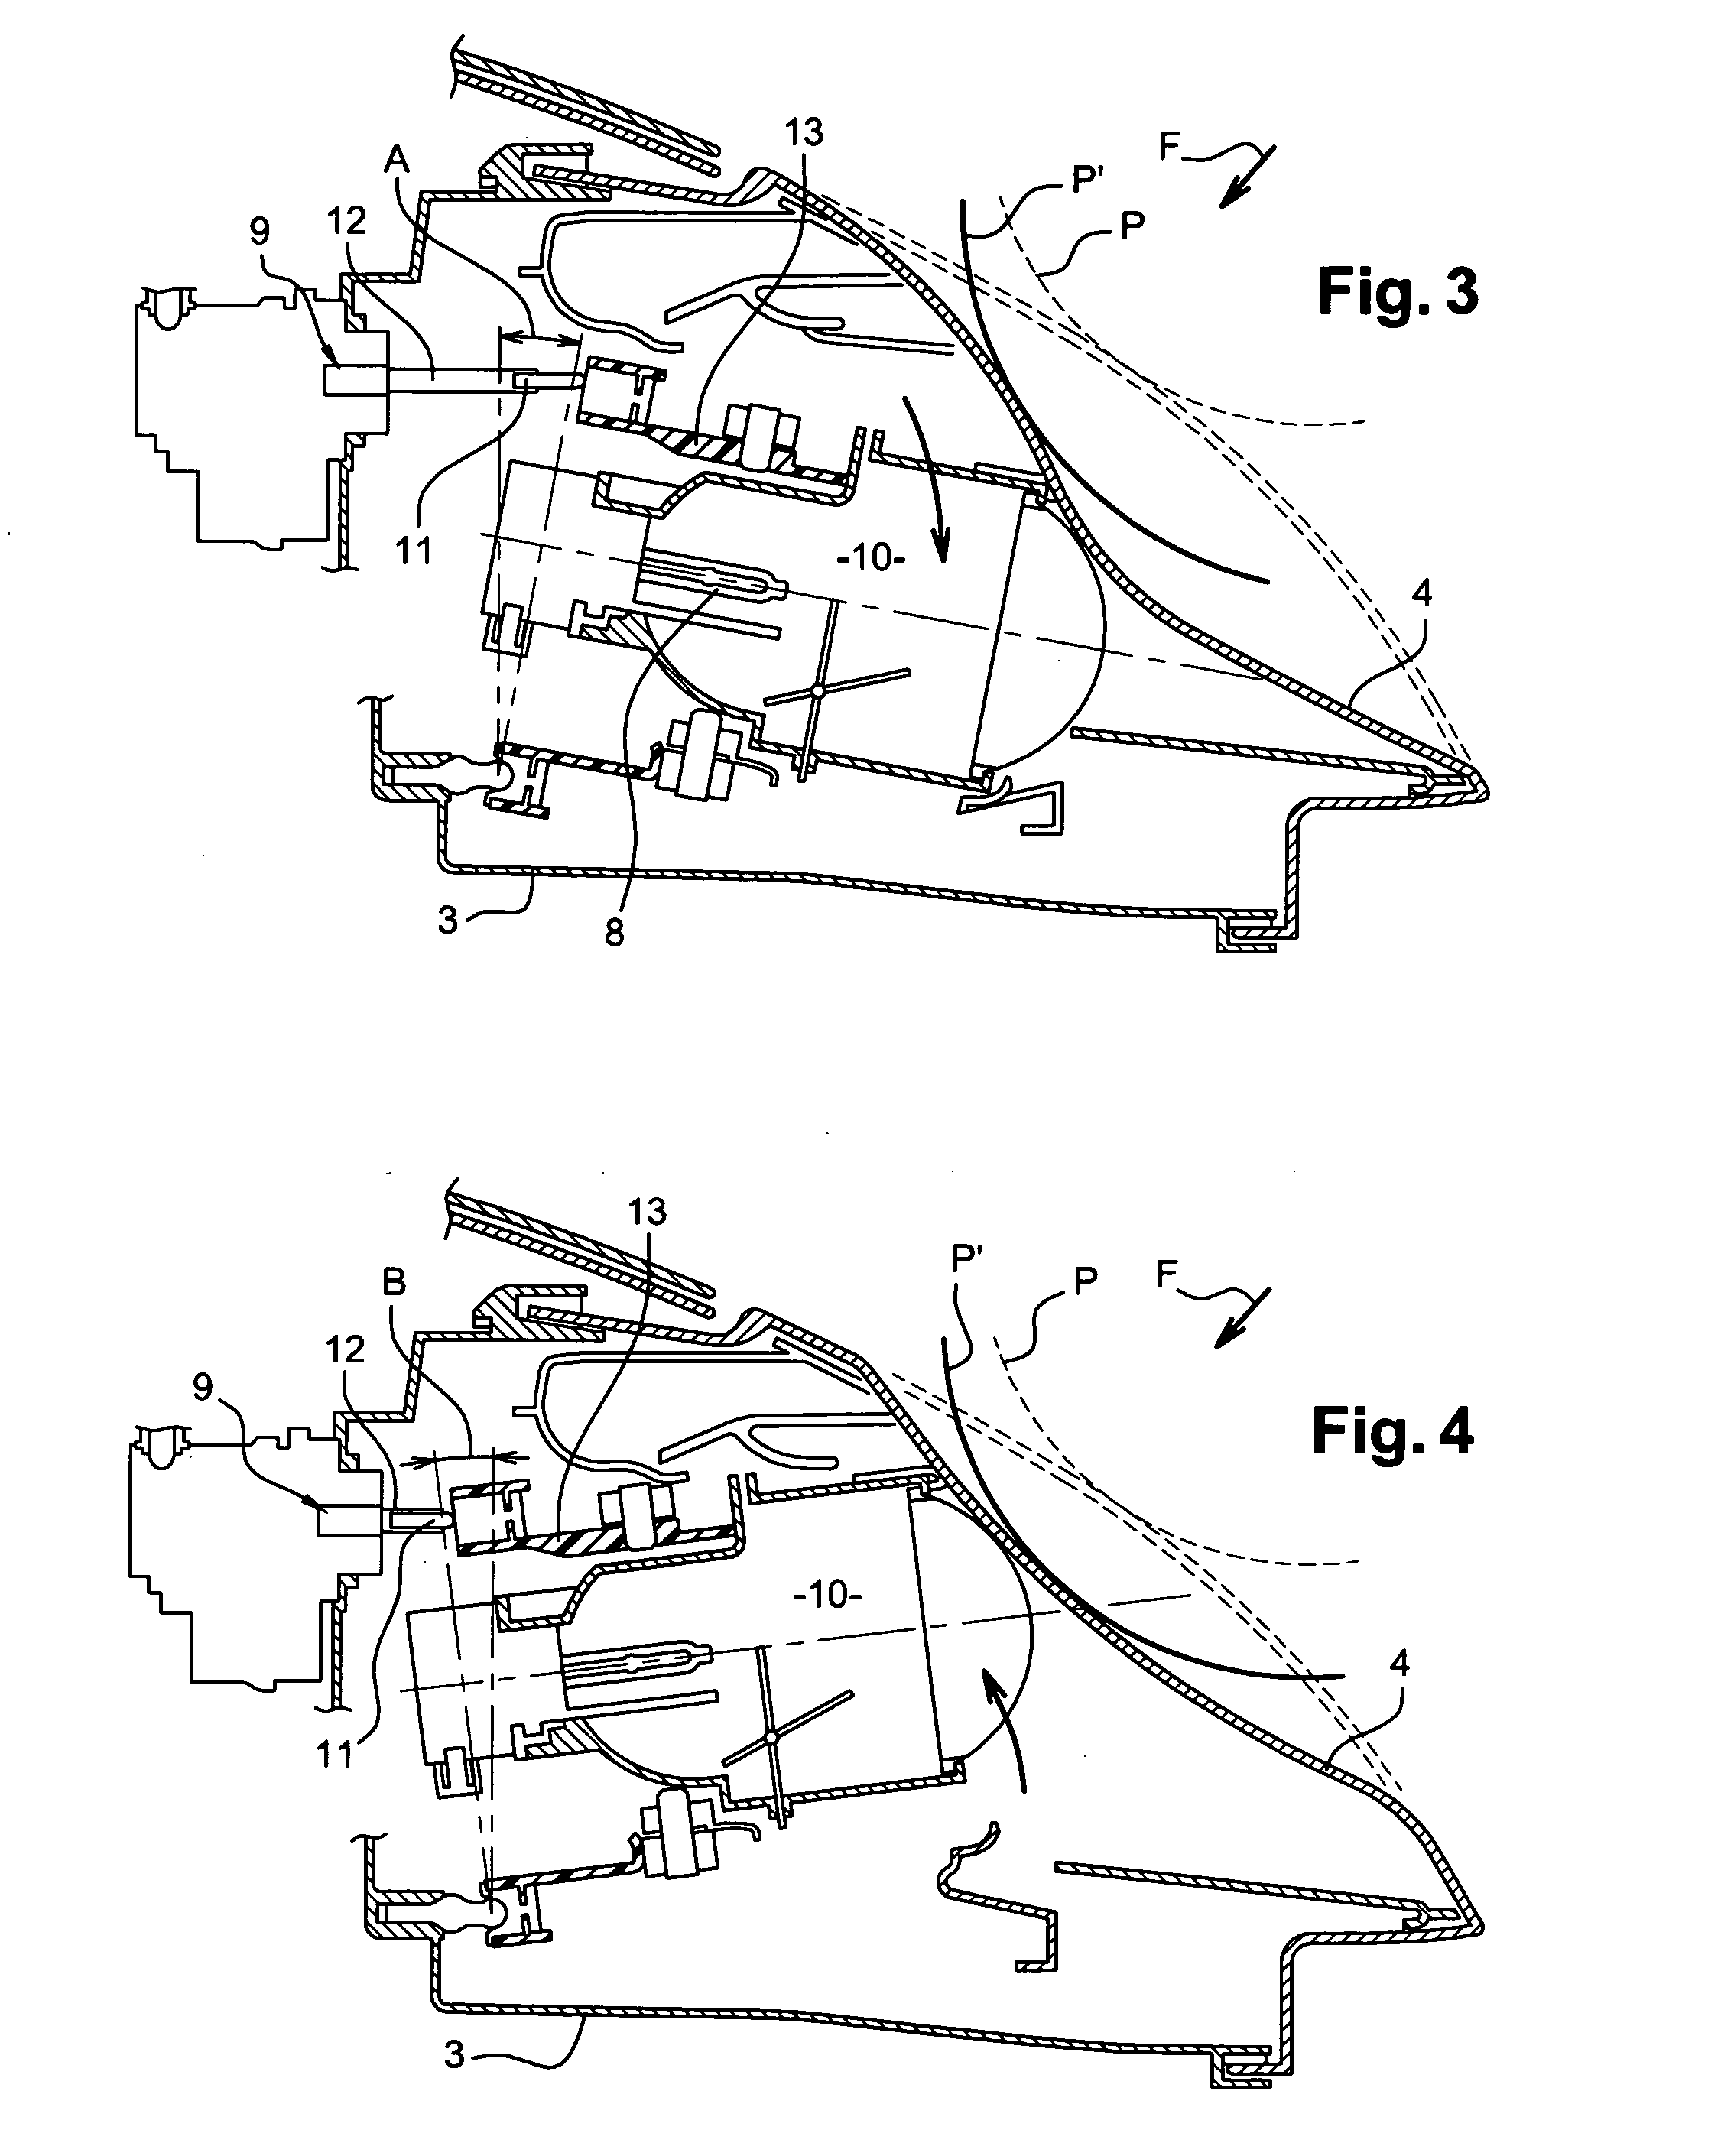 Energy absorbing headlight for a motor vehicle and a method of absorbing the energy produced by pedestrian impact